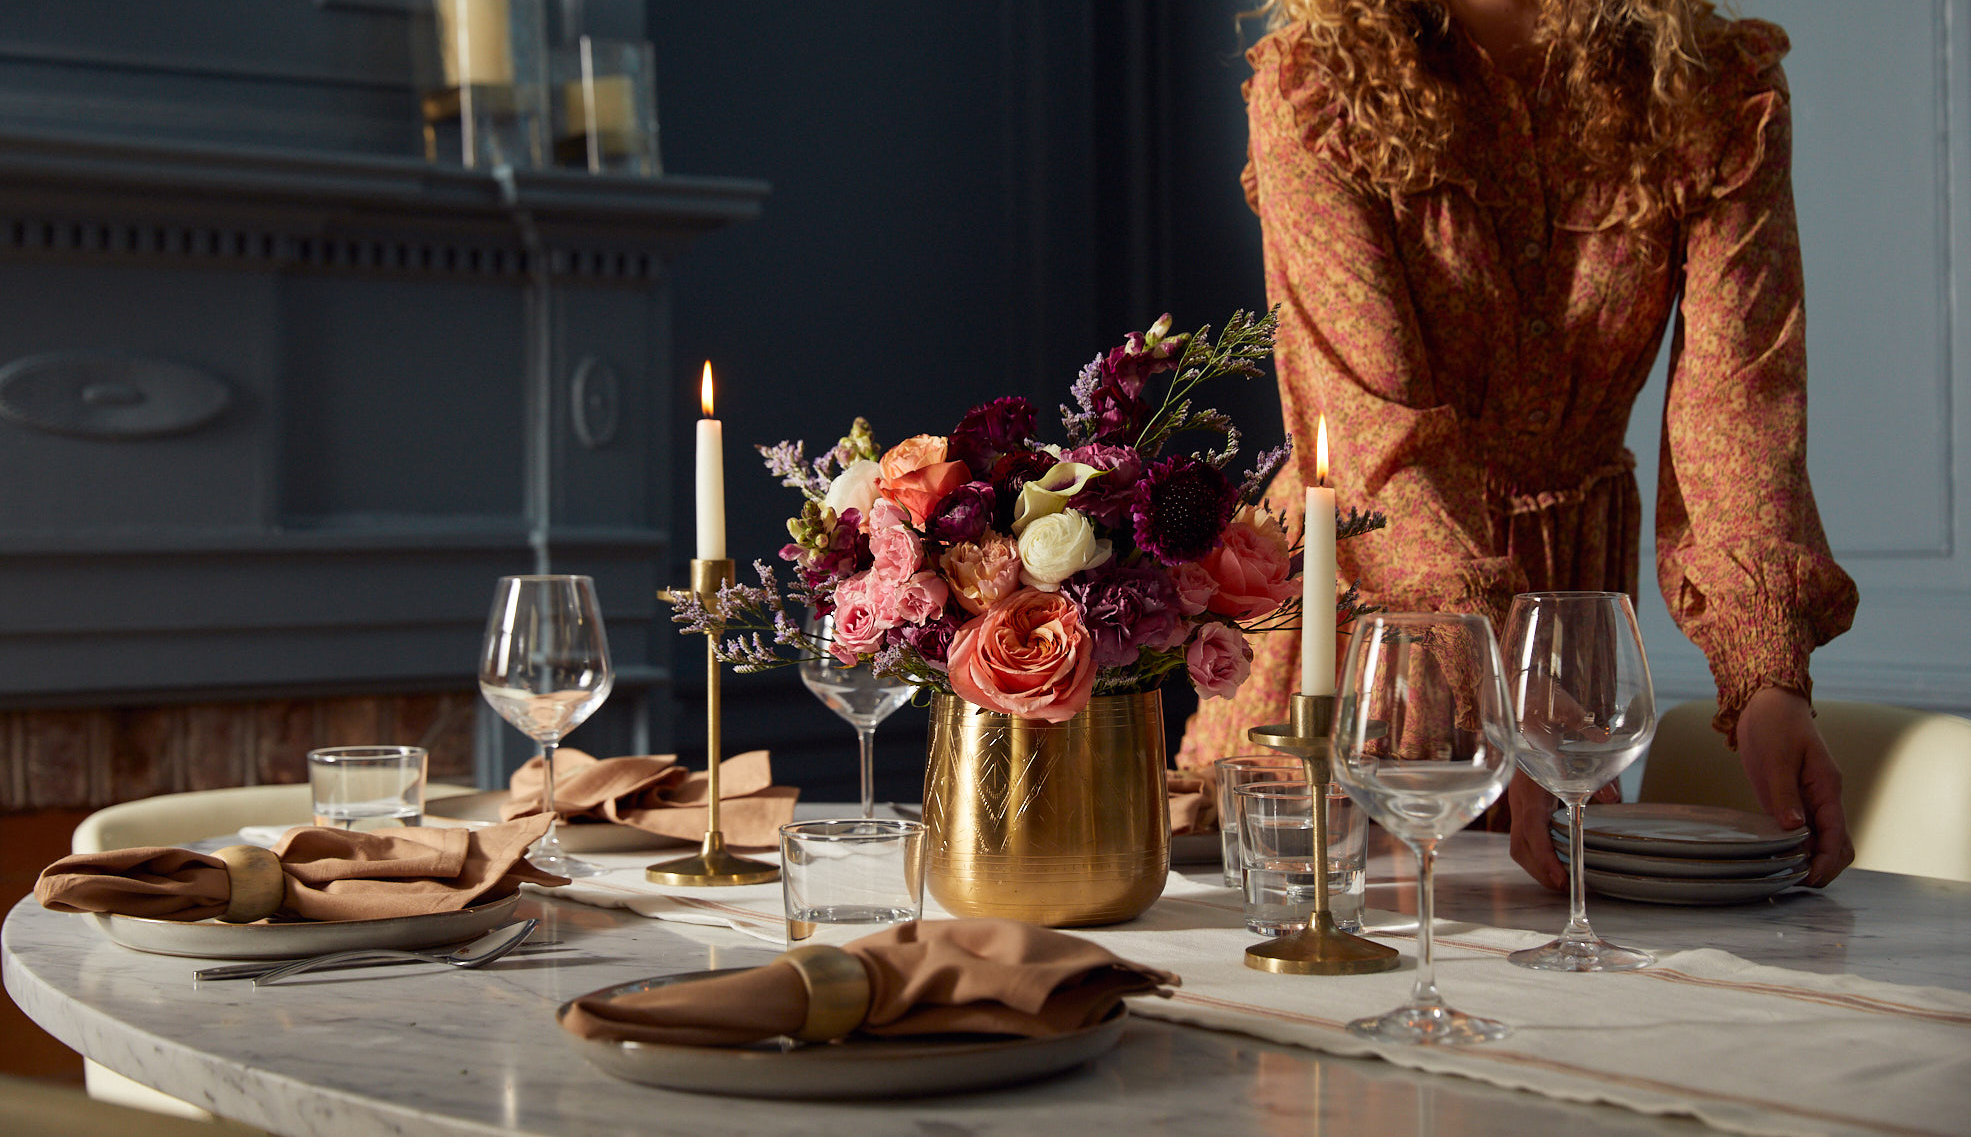 Fall table setting with fresh flowers perfect for entertaining